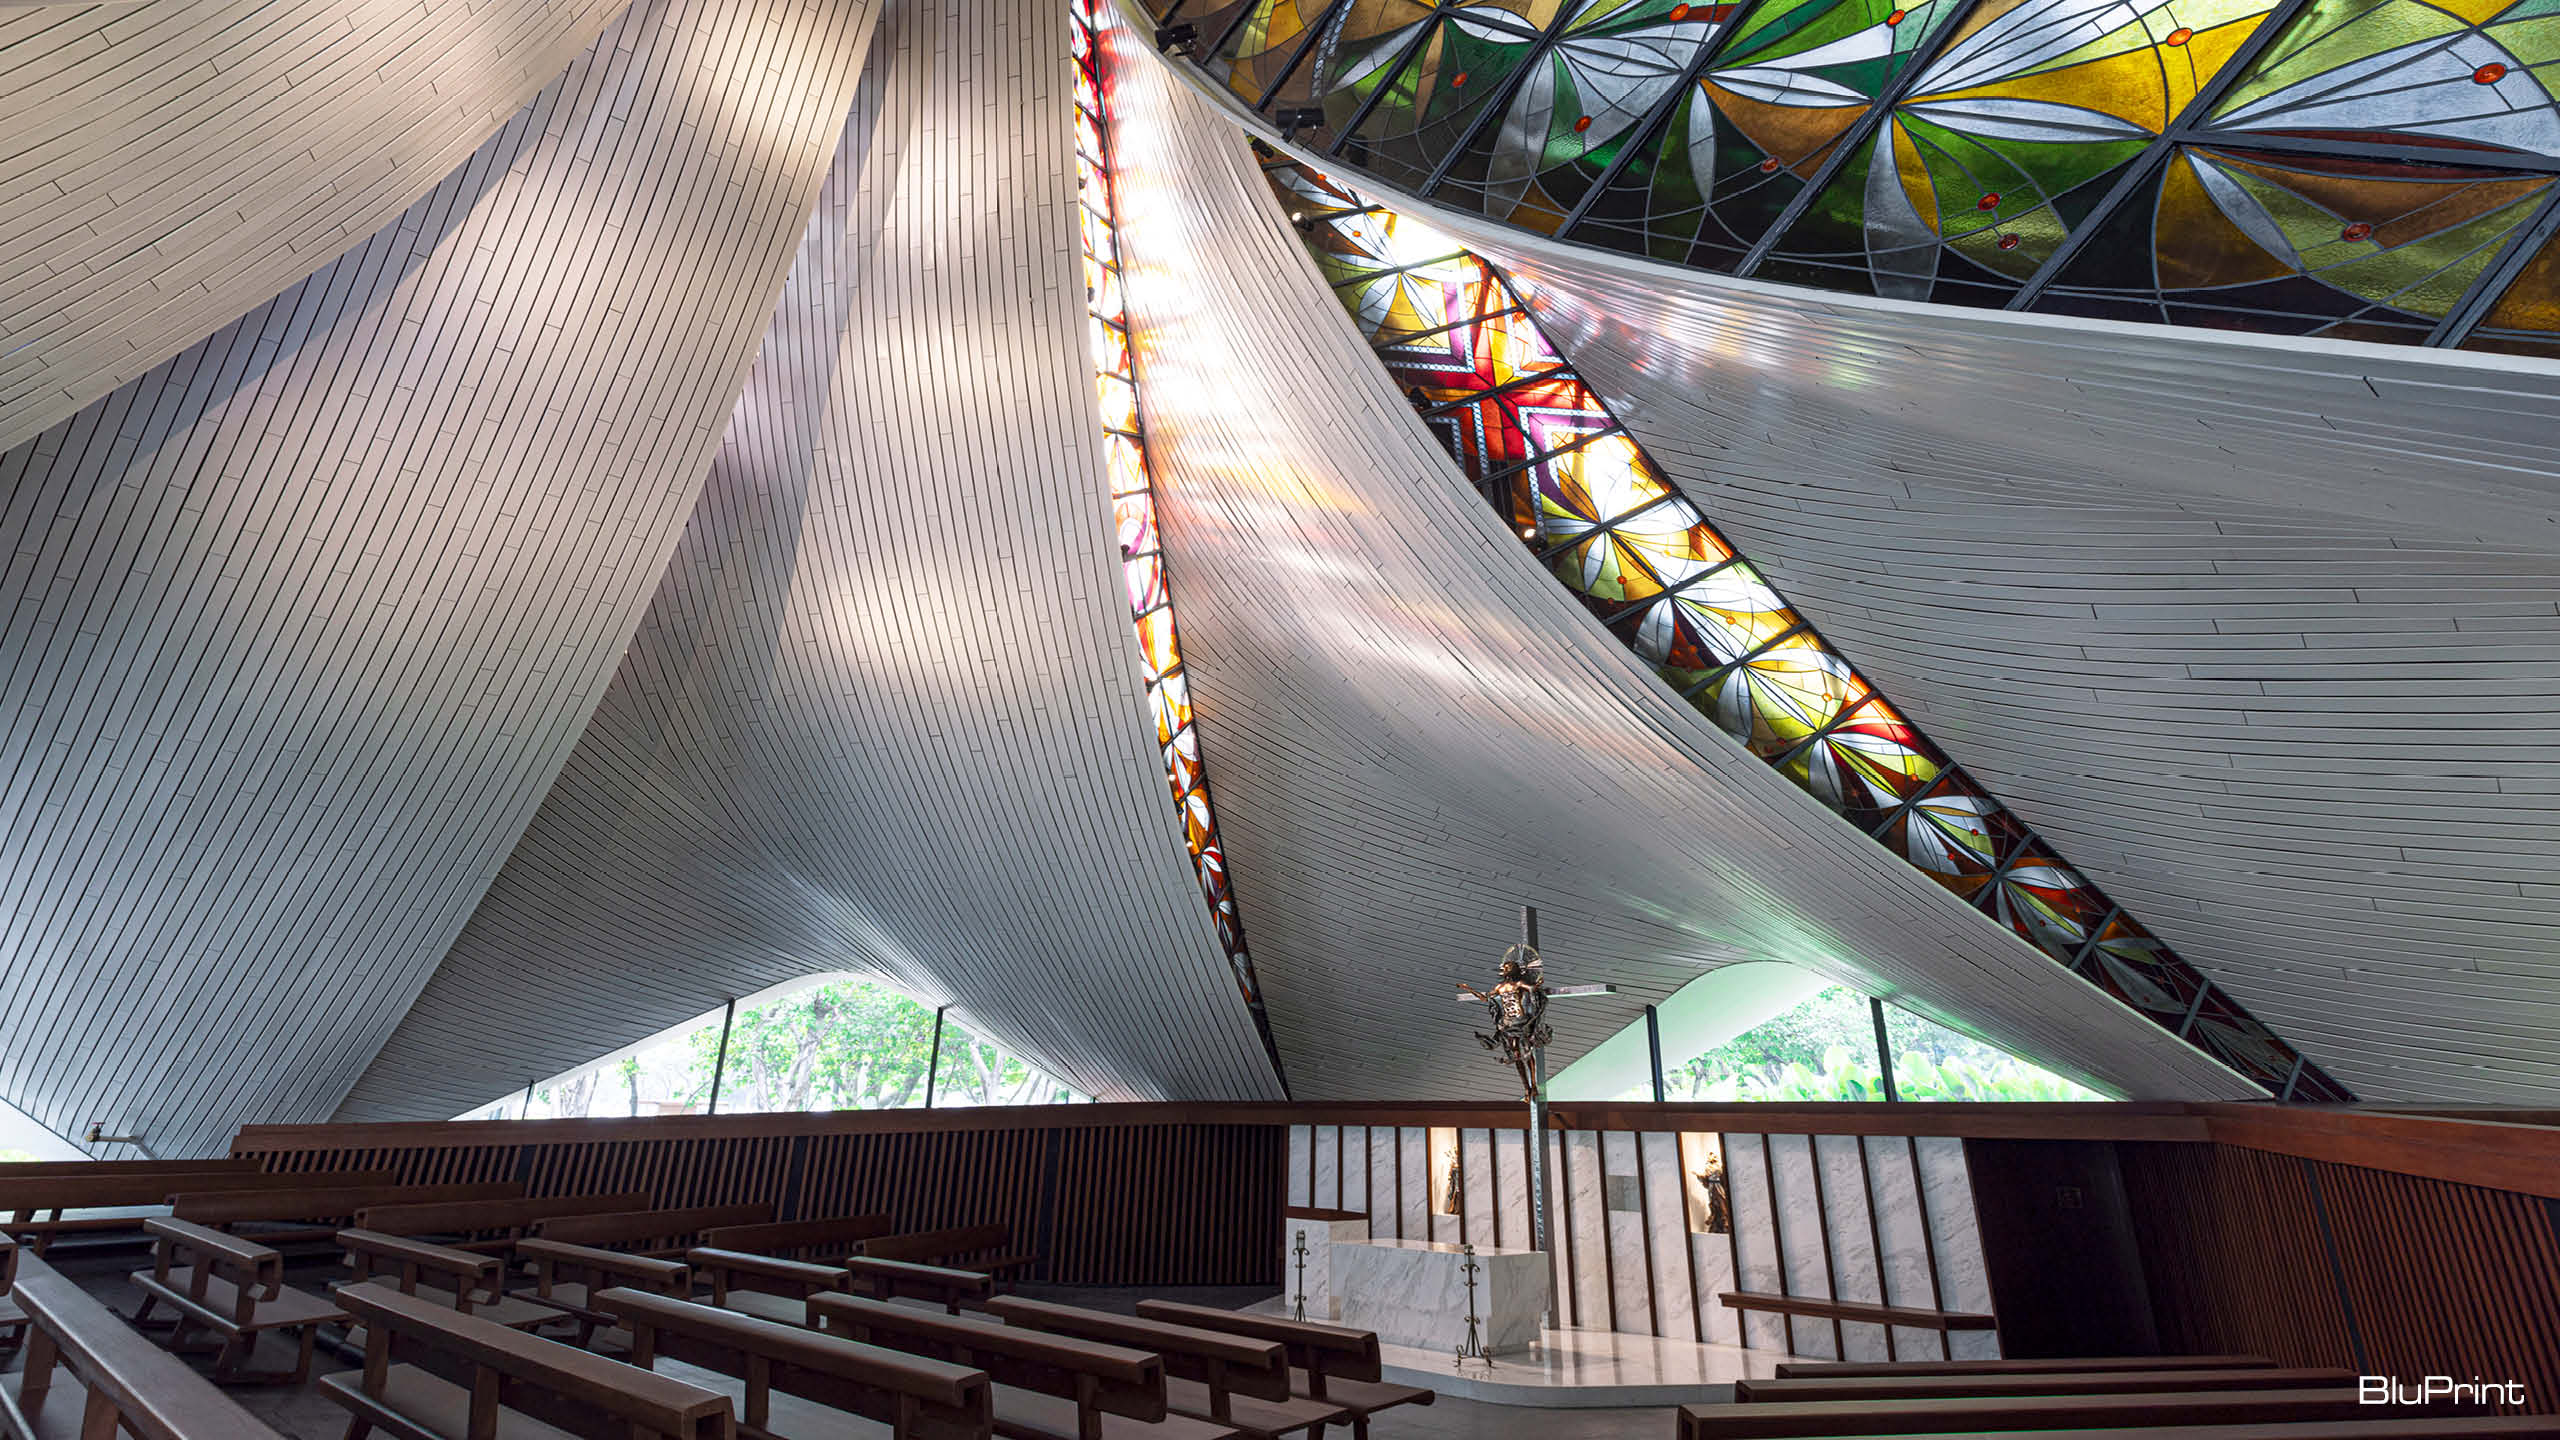 Interior shot of the Our Lady of Lourdes Chapel - ceiling and stained glass